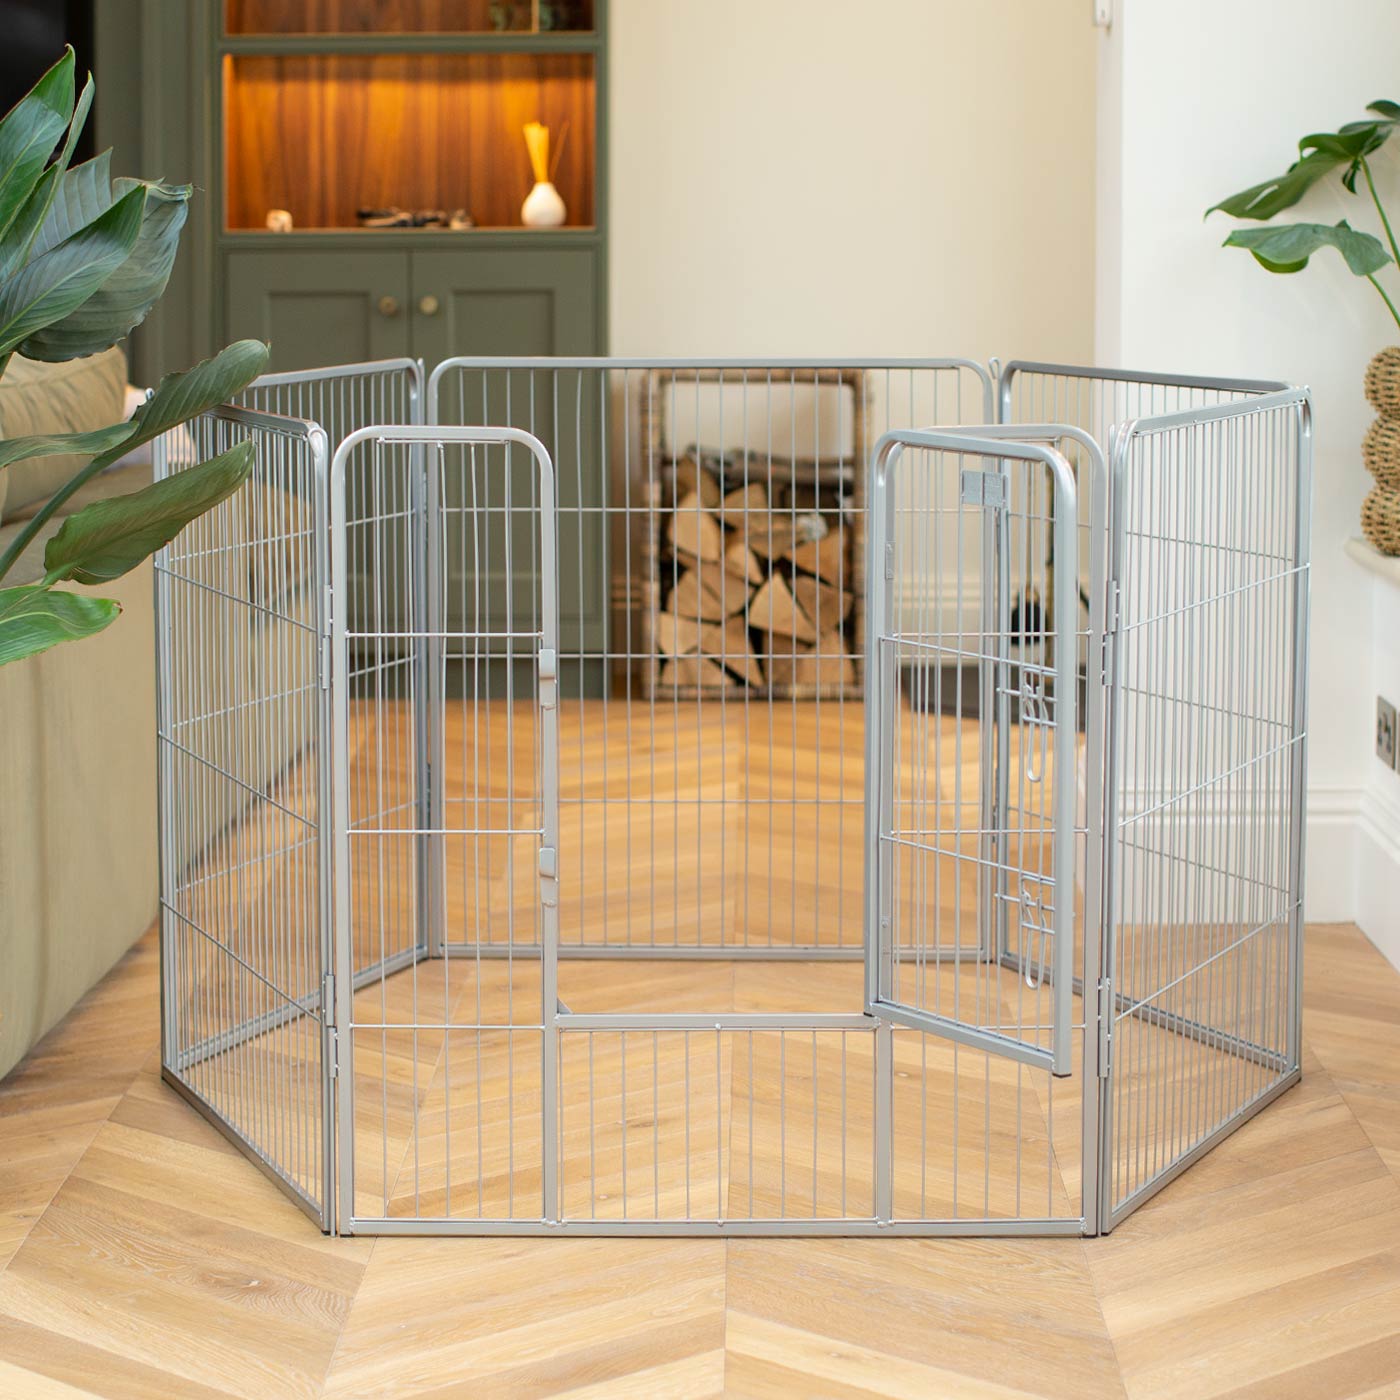 Ensure The Ultimate Puppy Safety with Our Heavy Duty 80cm High Silver Metal Play Pen, Crafted to Take Your Pet Right Through Maturity! Powder Coated to Be Extra Hardwearing! 6 panels that are 80cm high and attachments to connect to any cage. The modular system allows you to change the puppy pen shape with multiple layouts! Available To Now at Lords & Labradors US